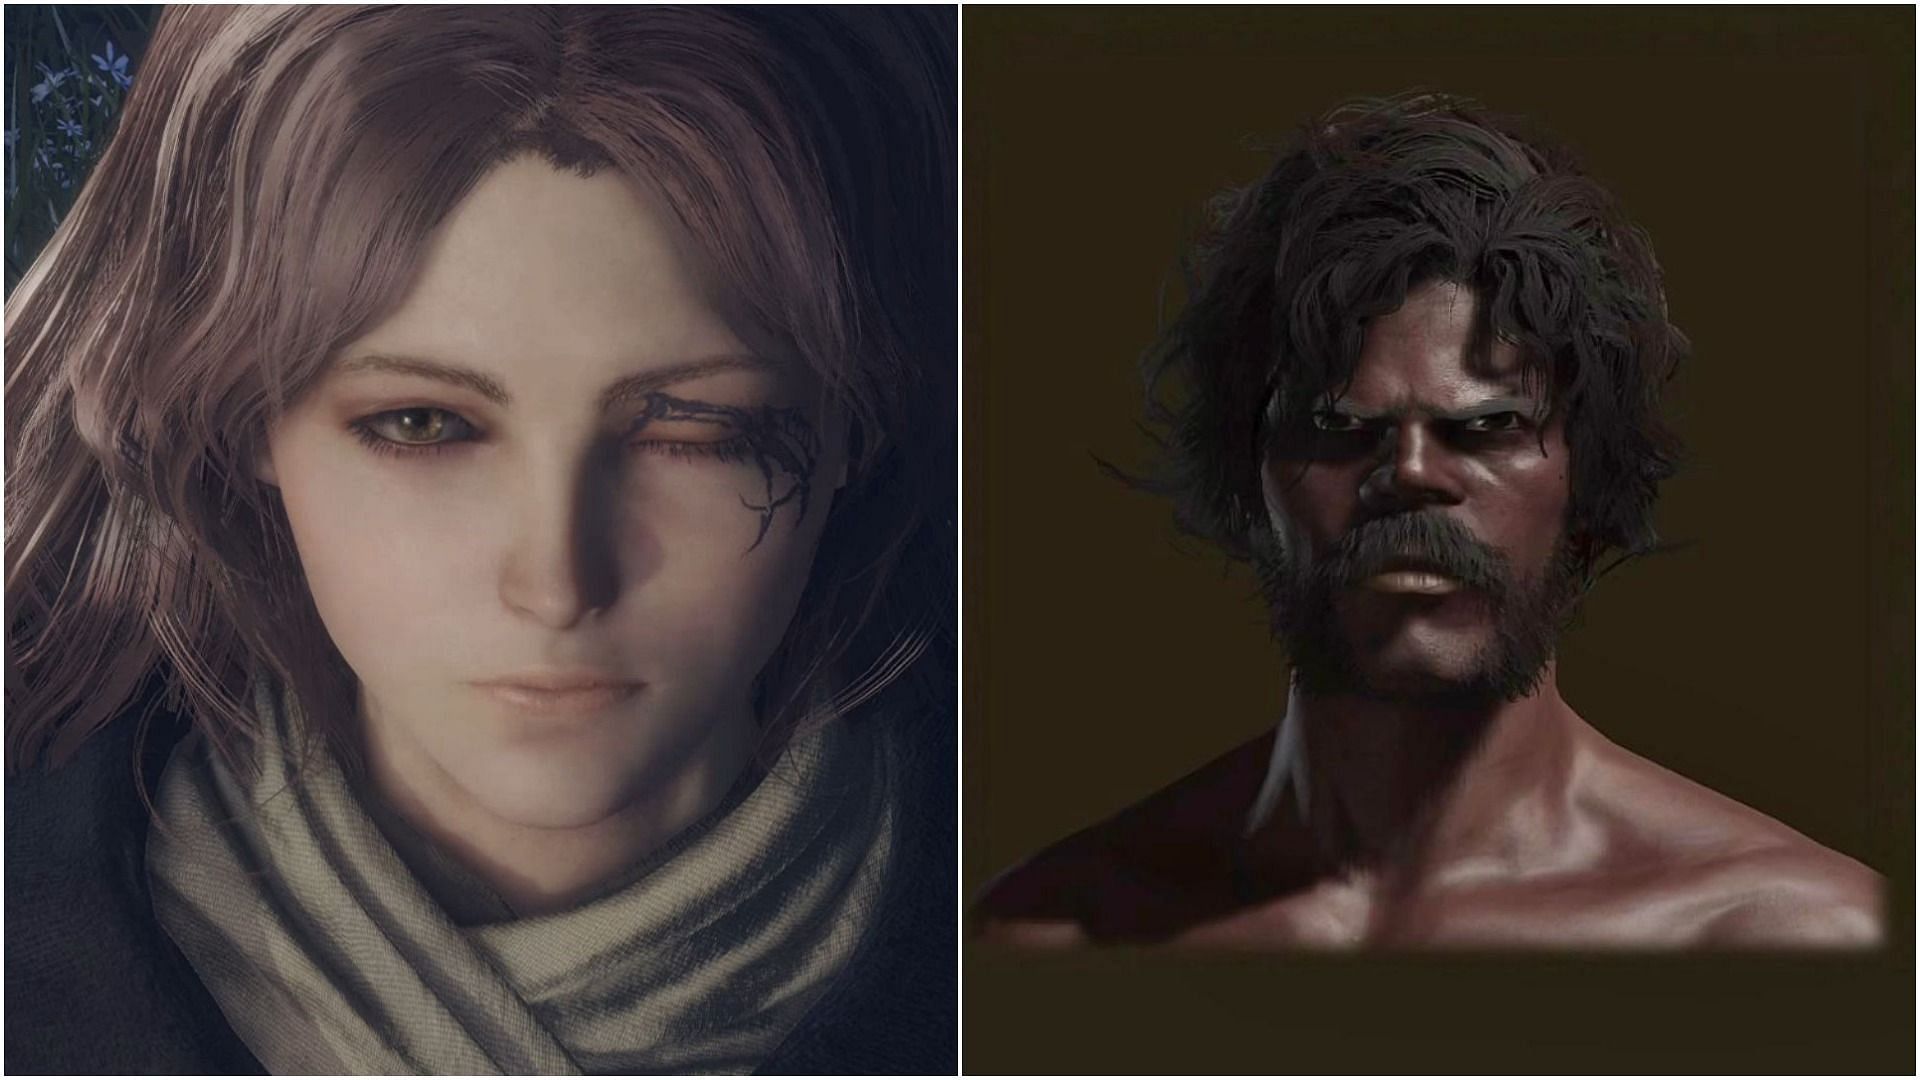 Players have shown their utmost creativity when it comes to creating characters in the game (Images via Elden Ring and drtbag9882/Twitter)